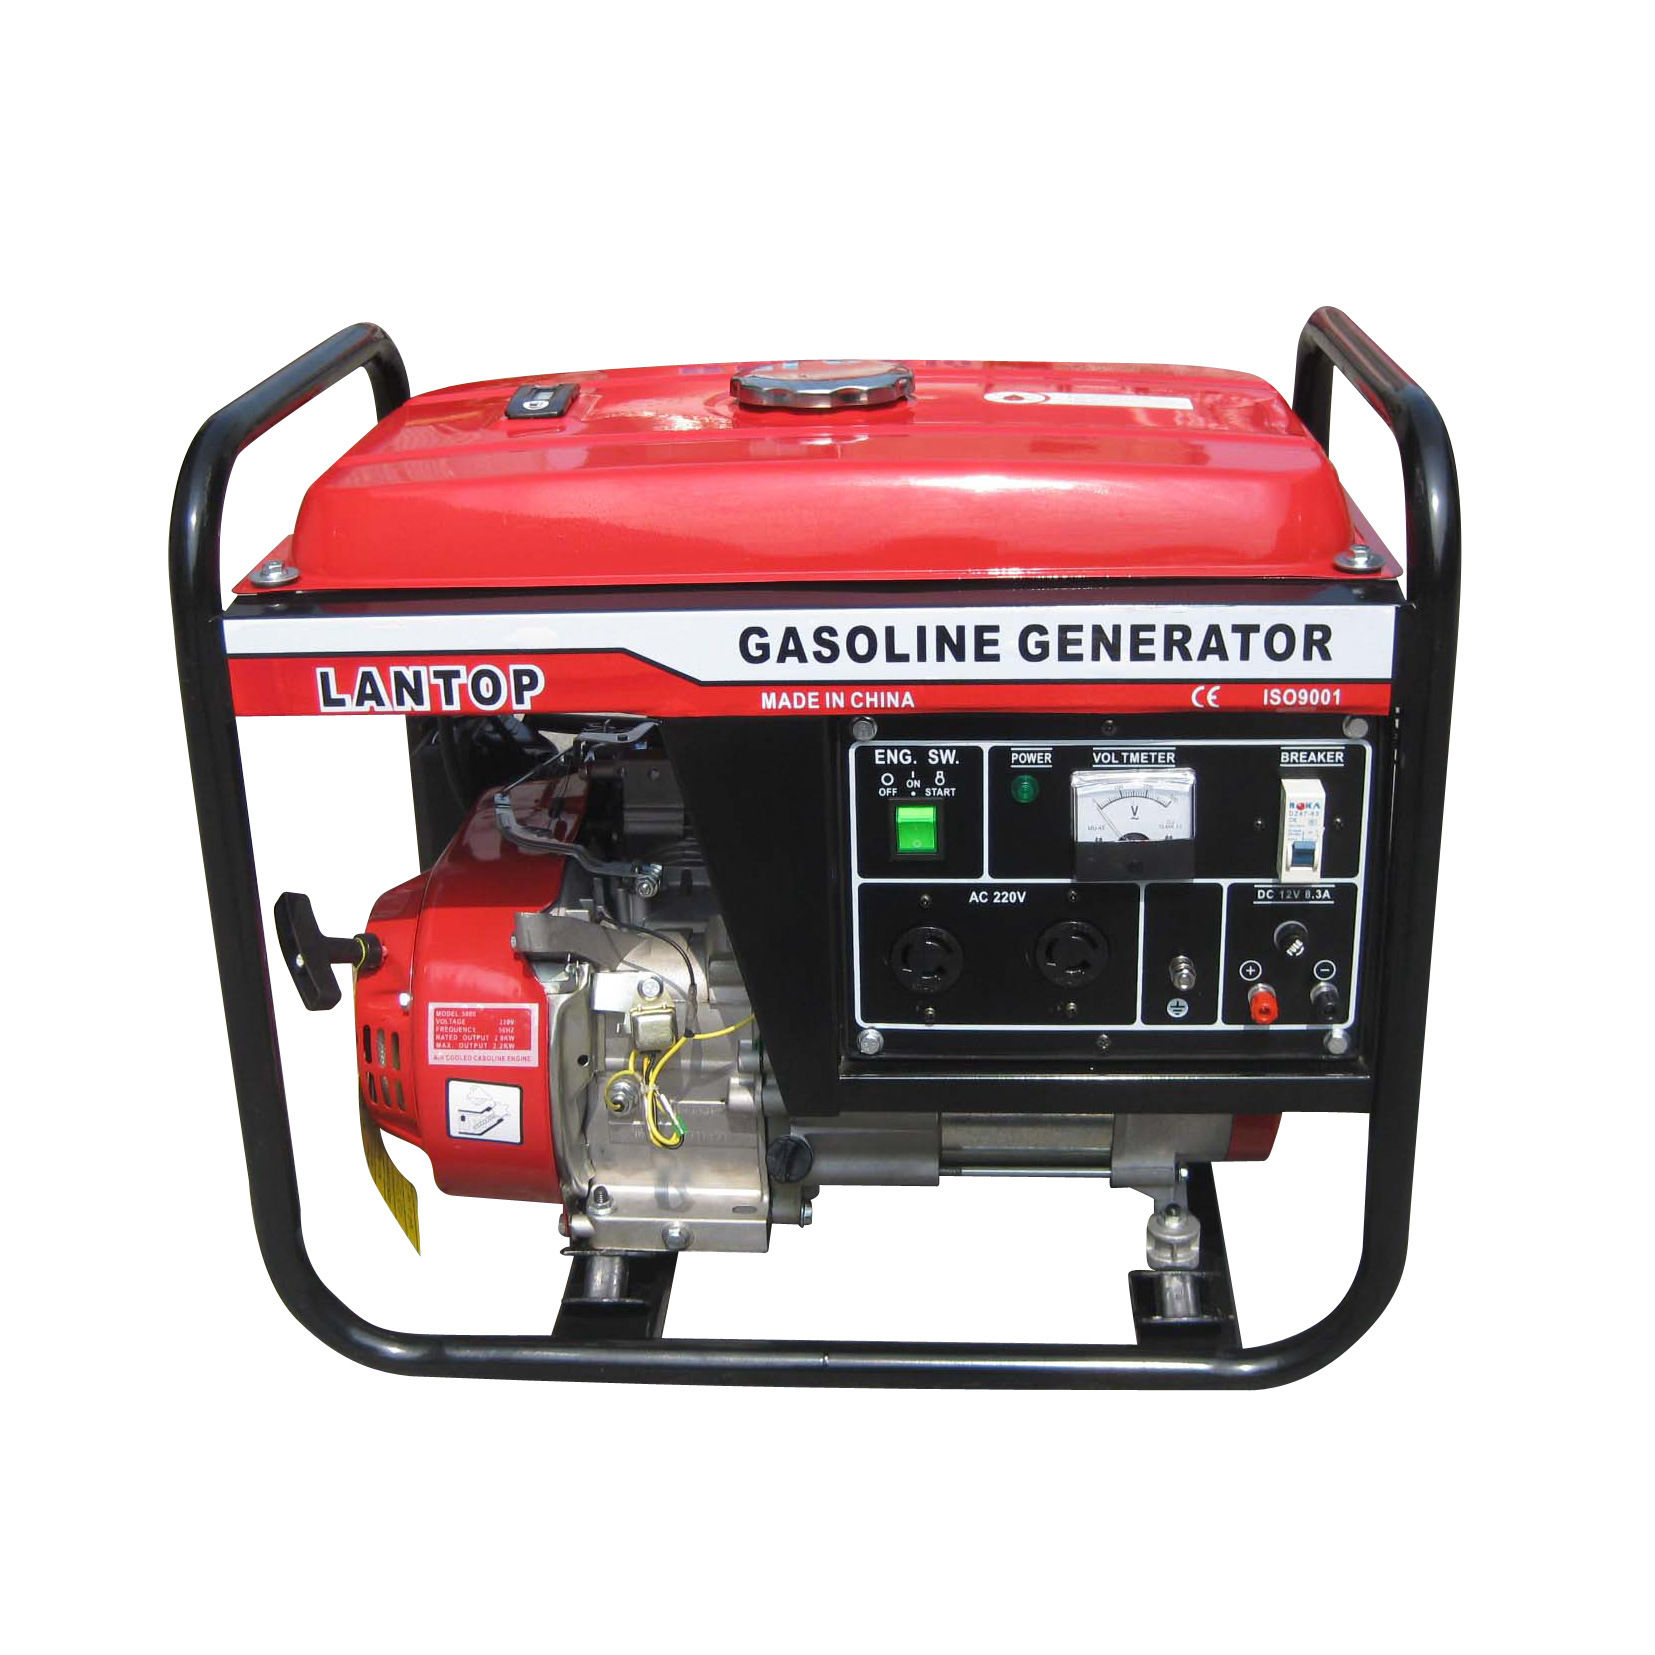 Lantop Gasoline Generator (JJ4800) with CE and Soncap Certificate